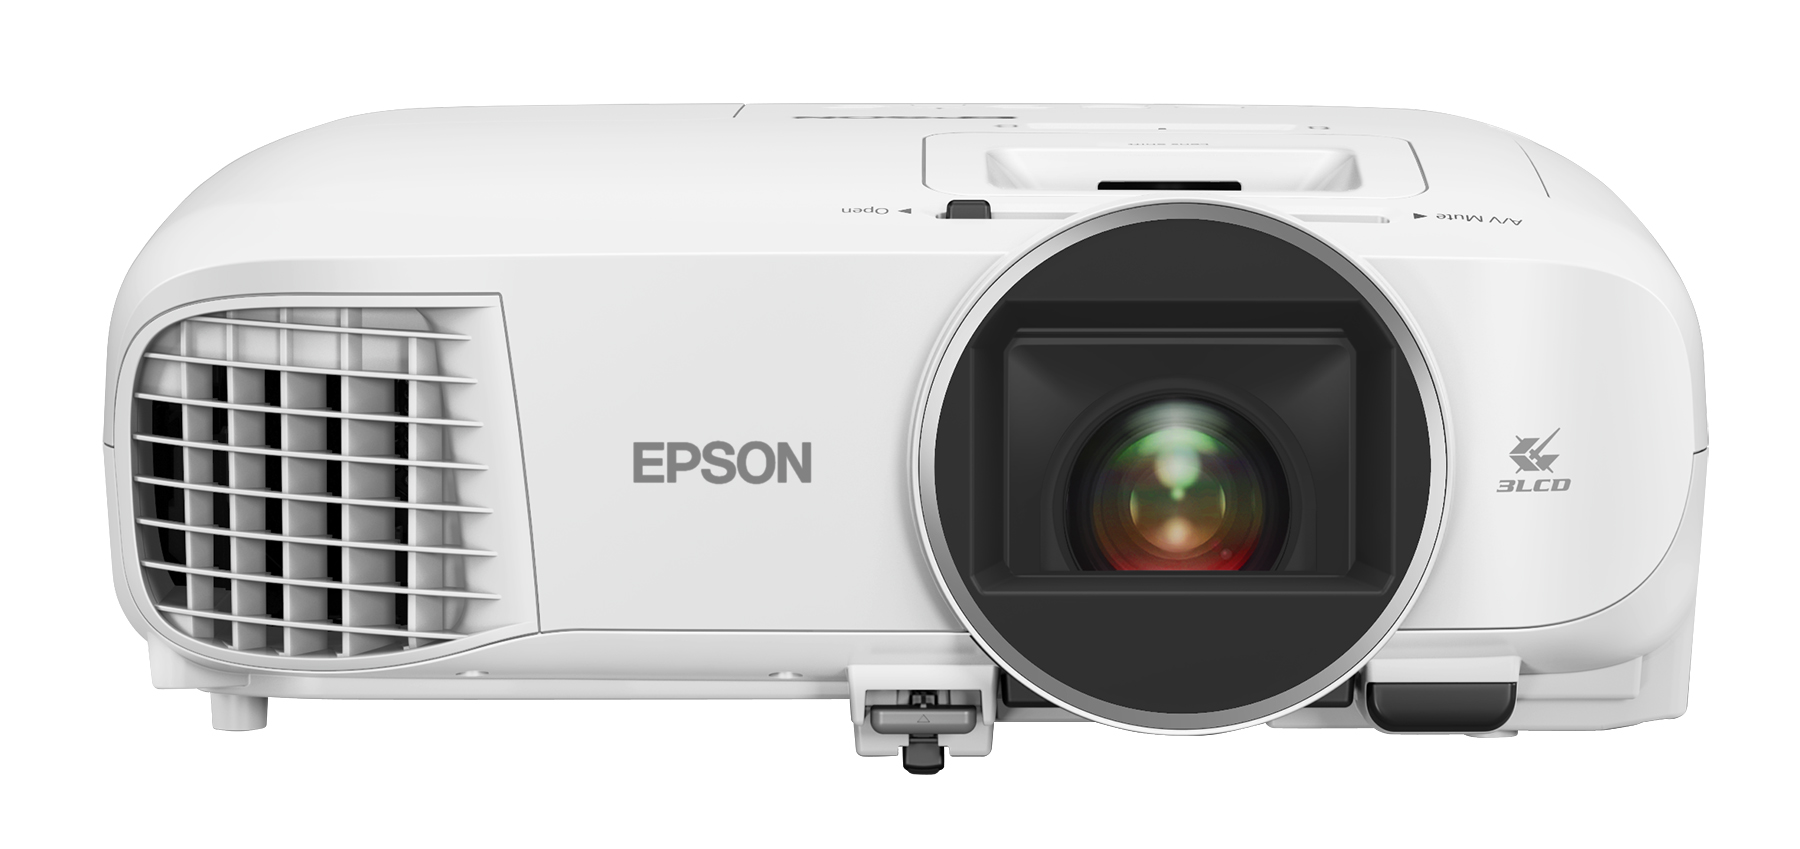 Epson Home Cinema Full HD, 1080p, 2,500 lumens color brightness (color light output), 2,500 lumens white brightness (white light output), 2x HDMI (1 MHL), 3LCD projector - image 1 of 6